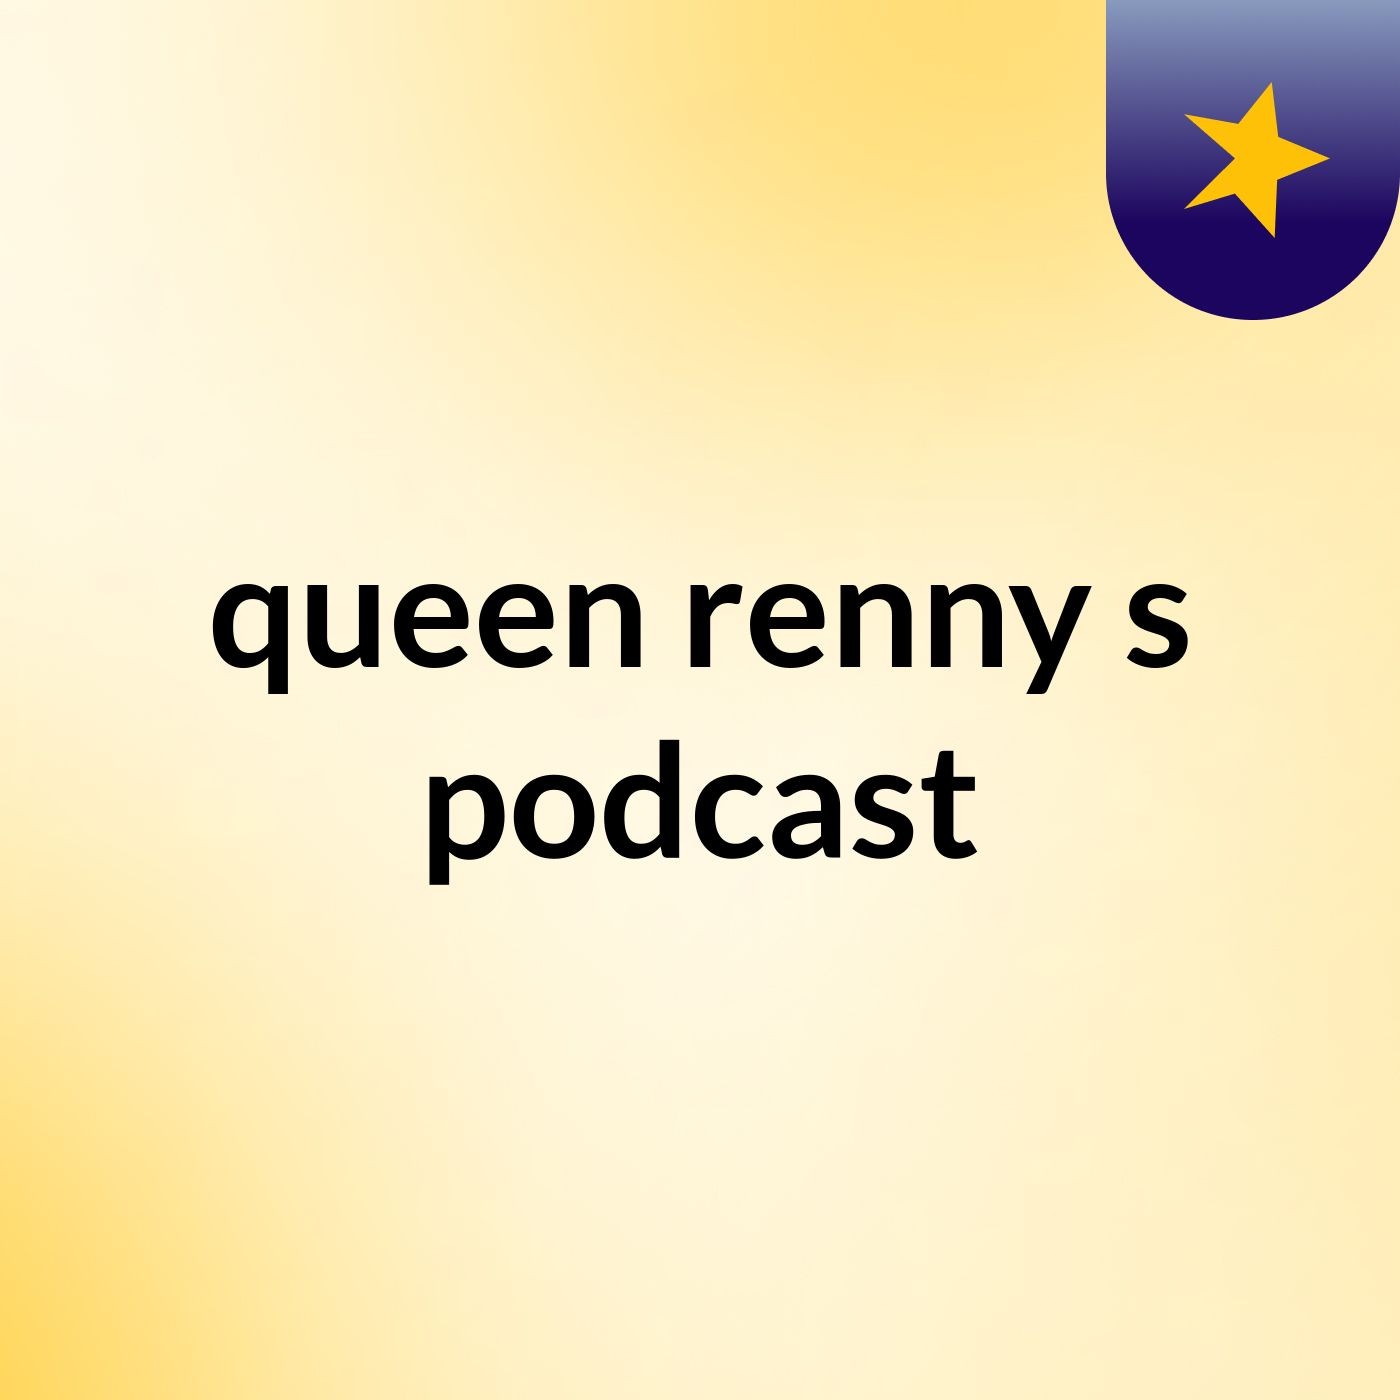 queen renny's podcast